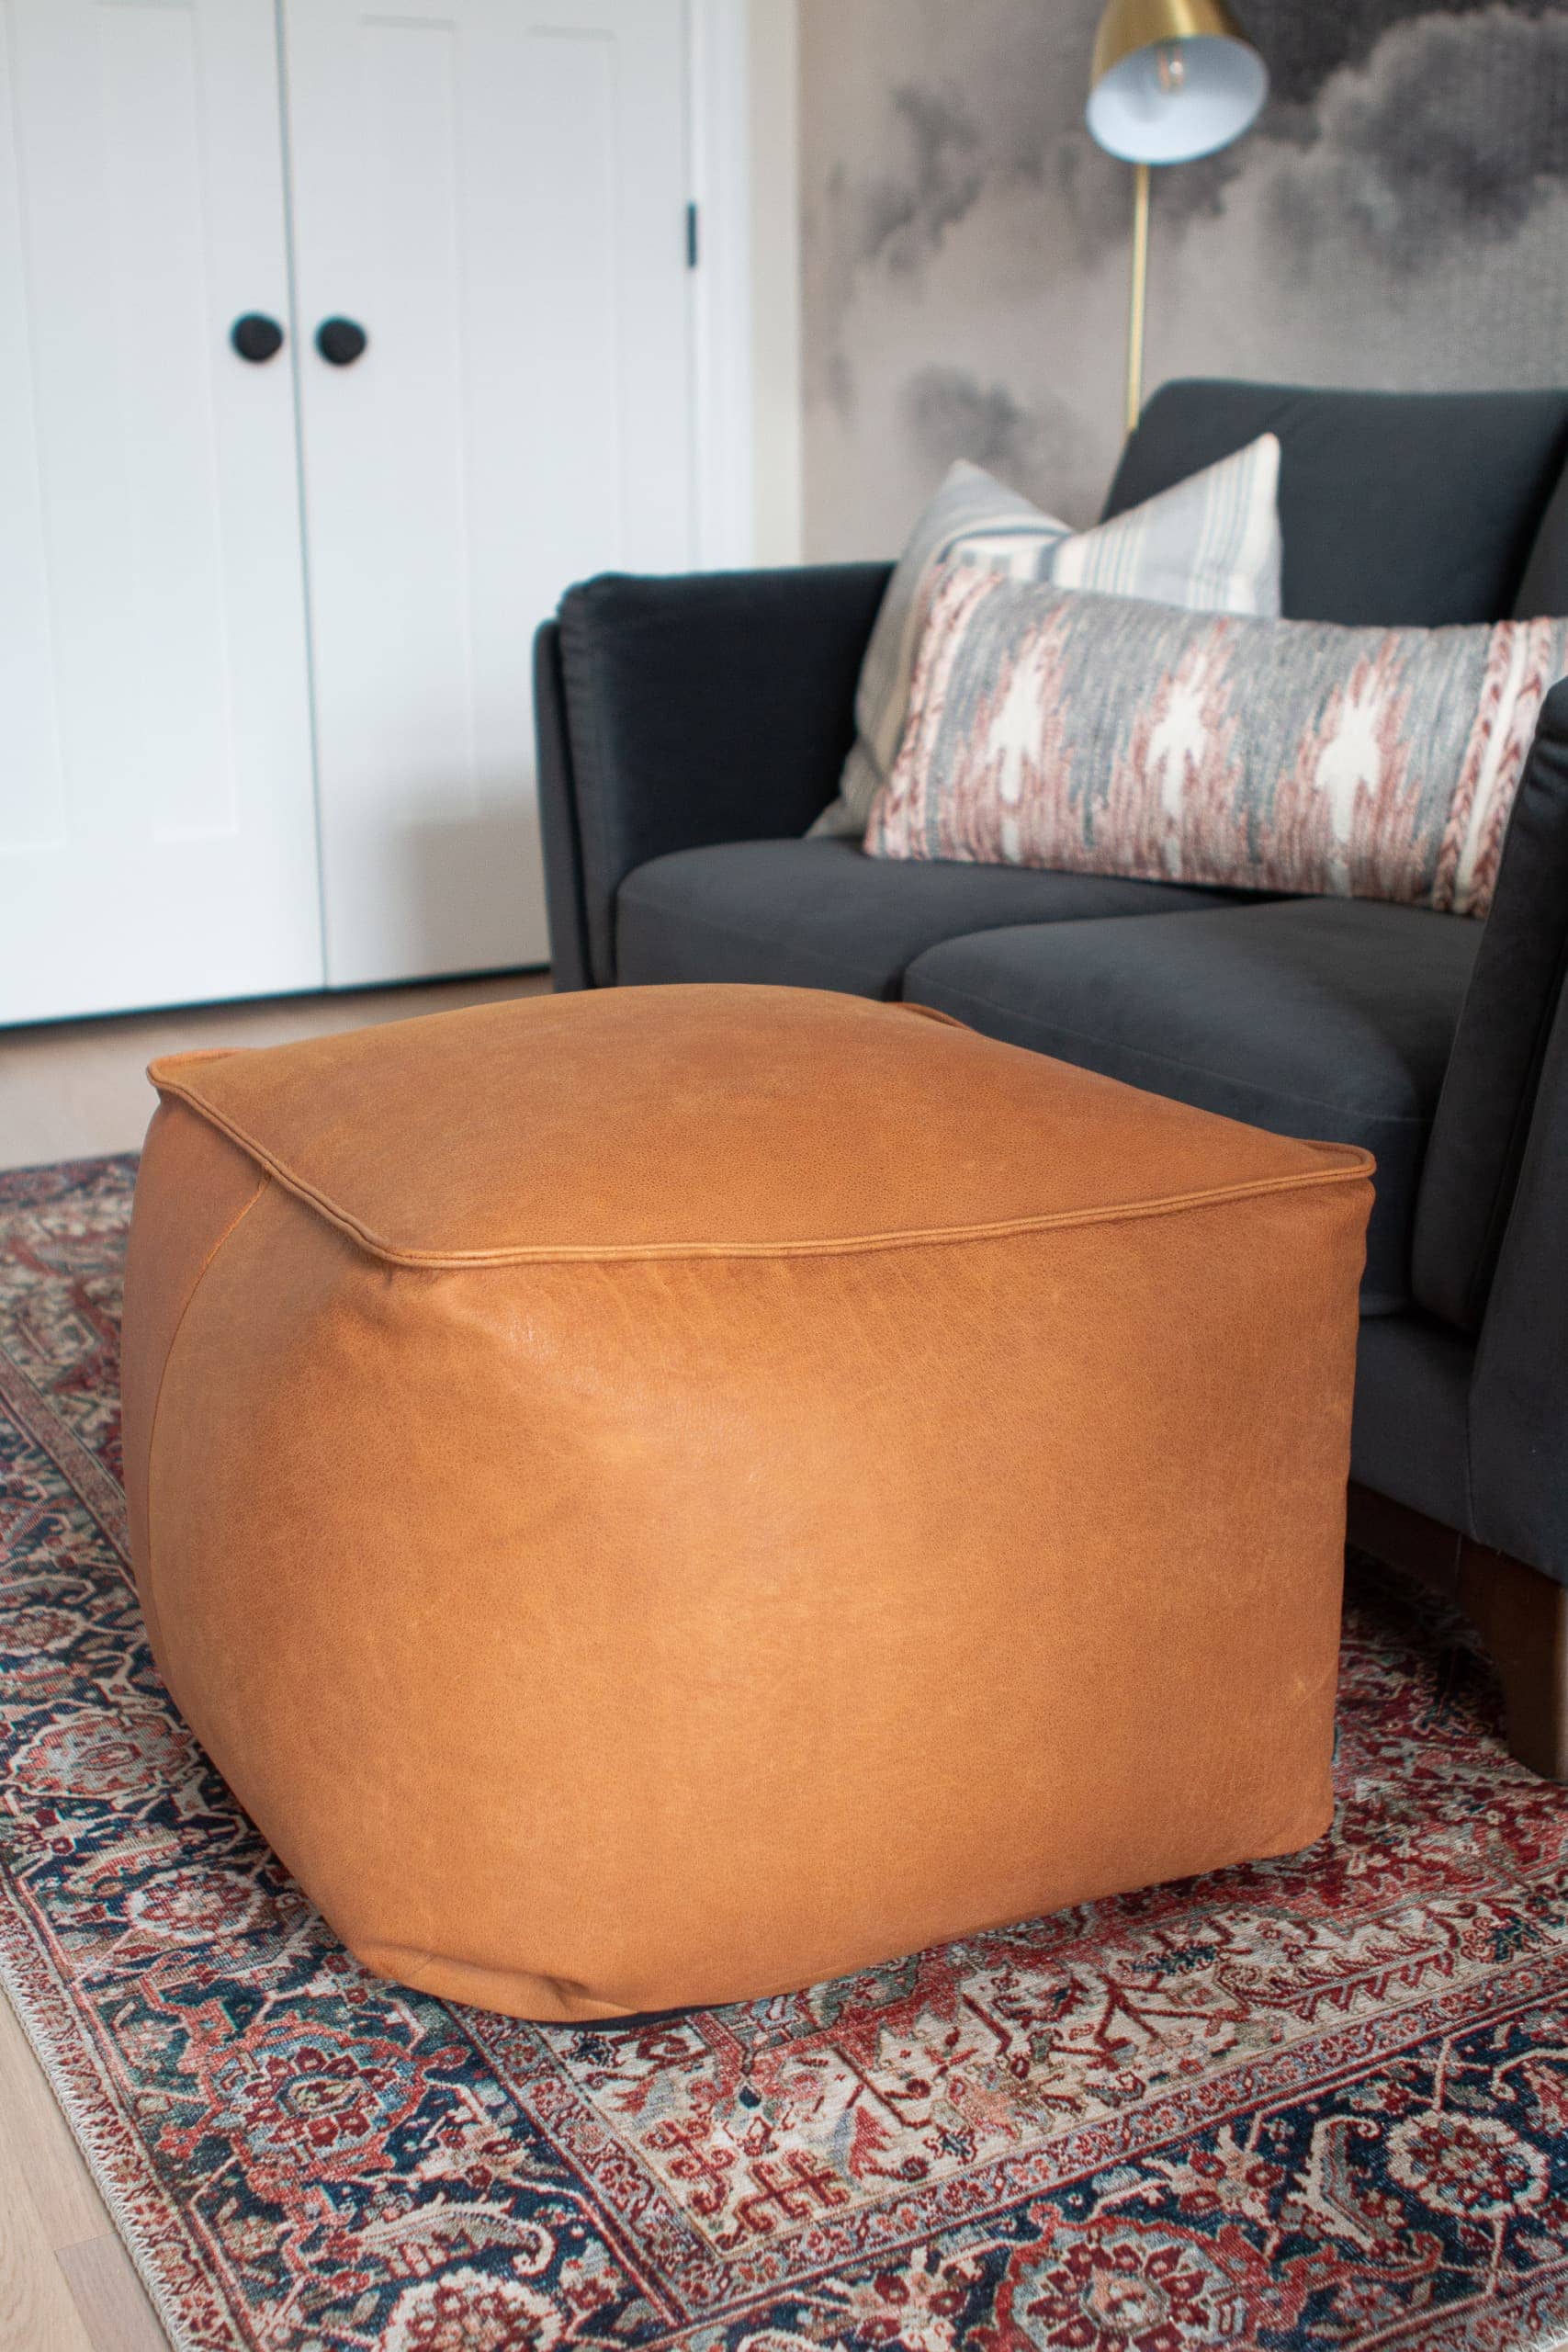 Leather pouf from article